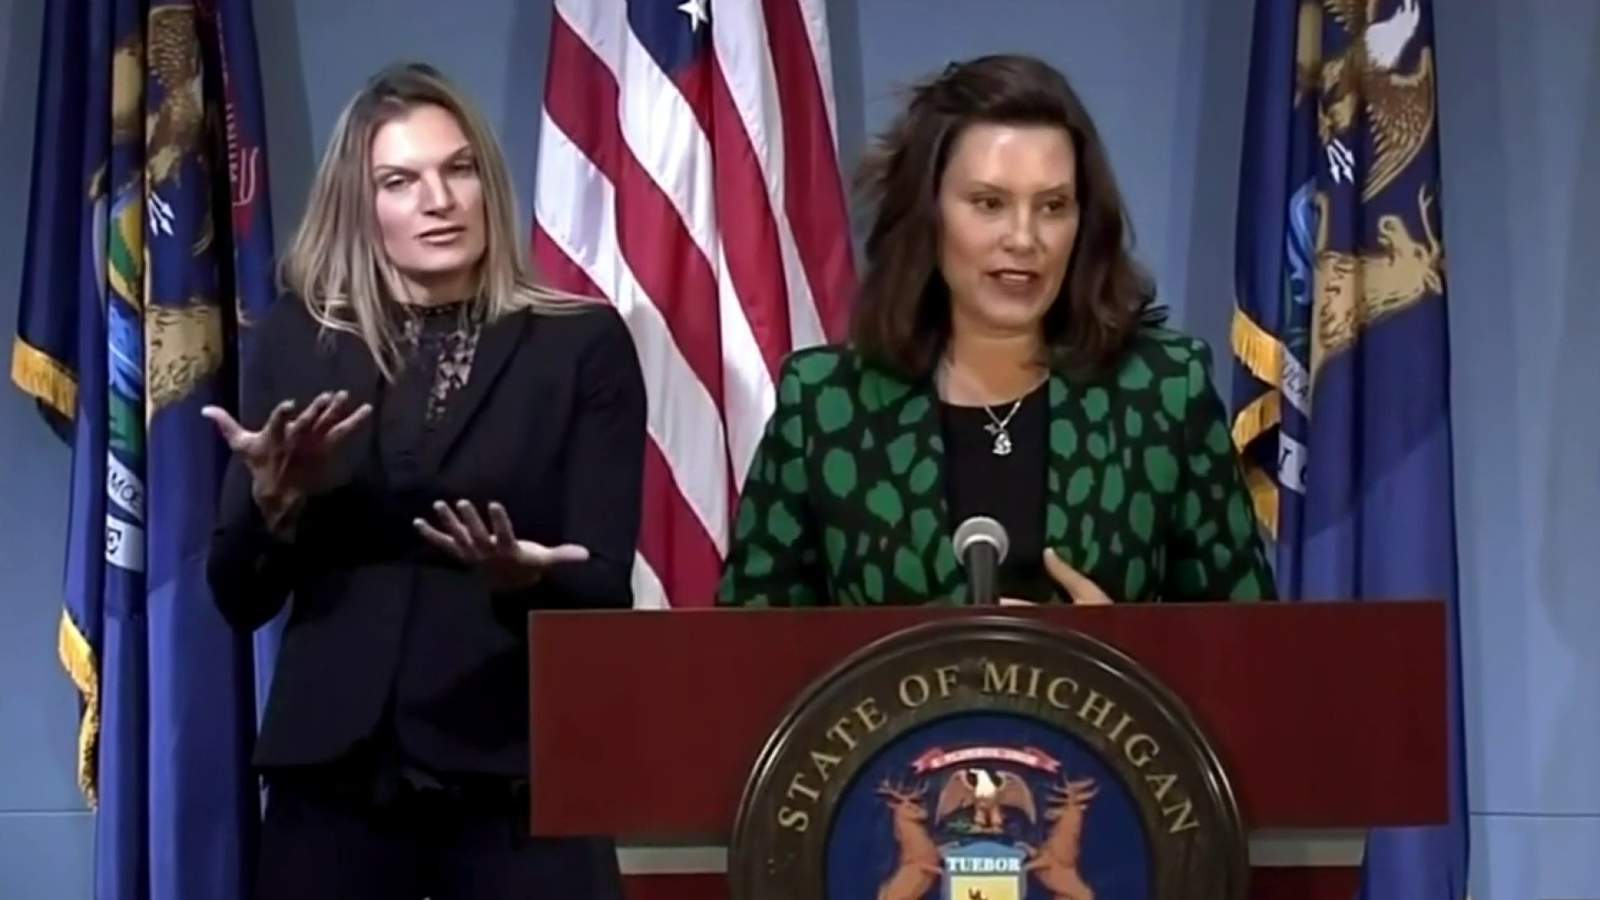 Michigan coaches join Gov. Whitmer to encourage mask usage as COVID-19 cases rise